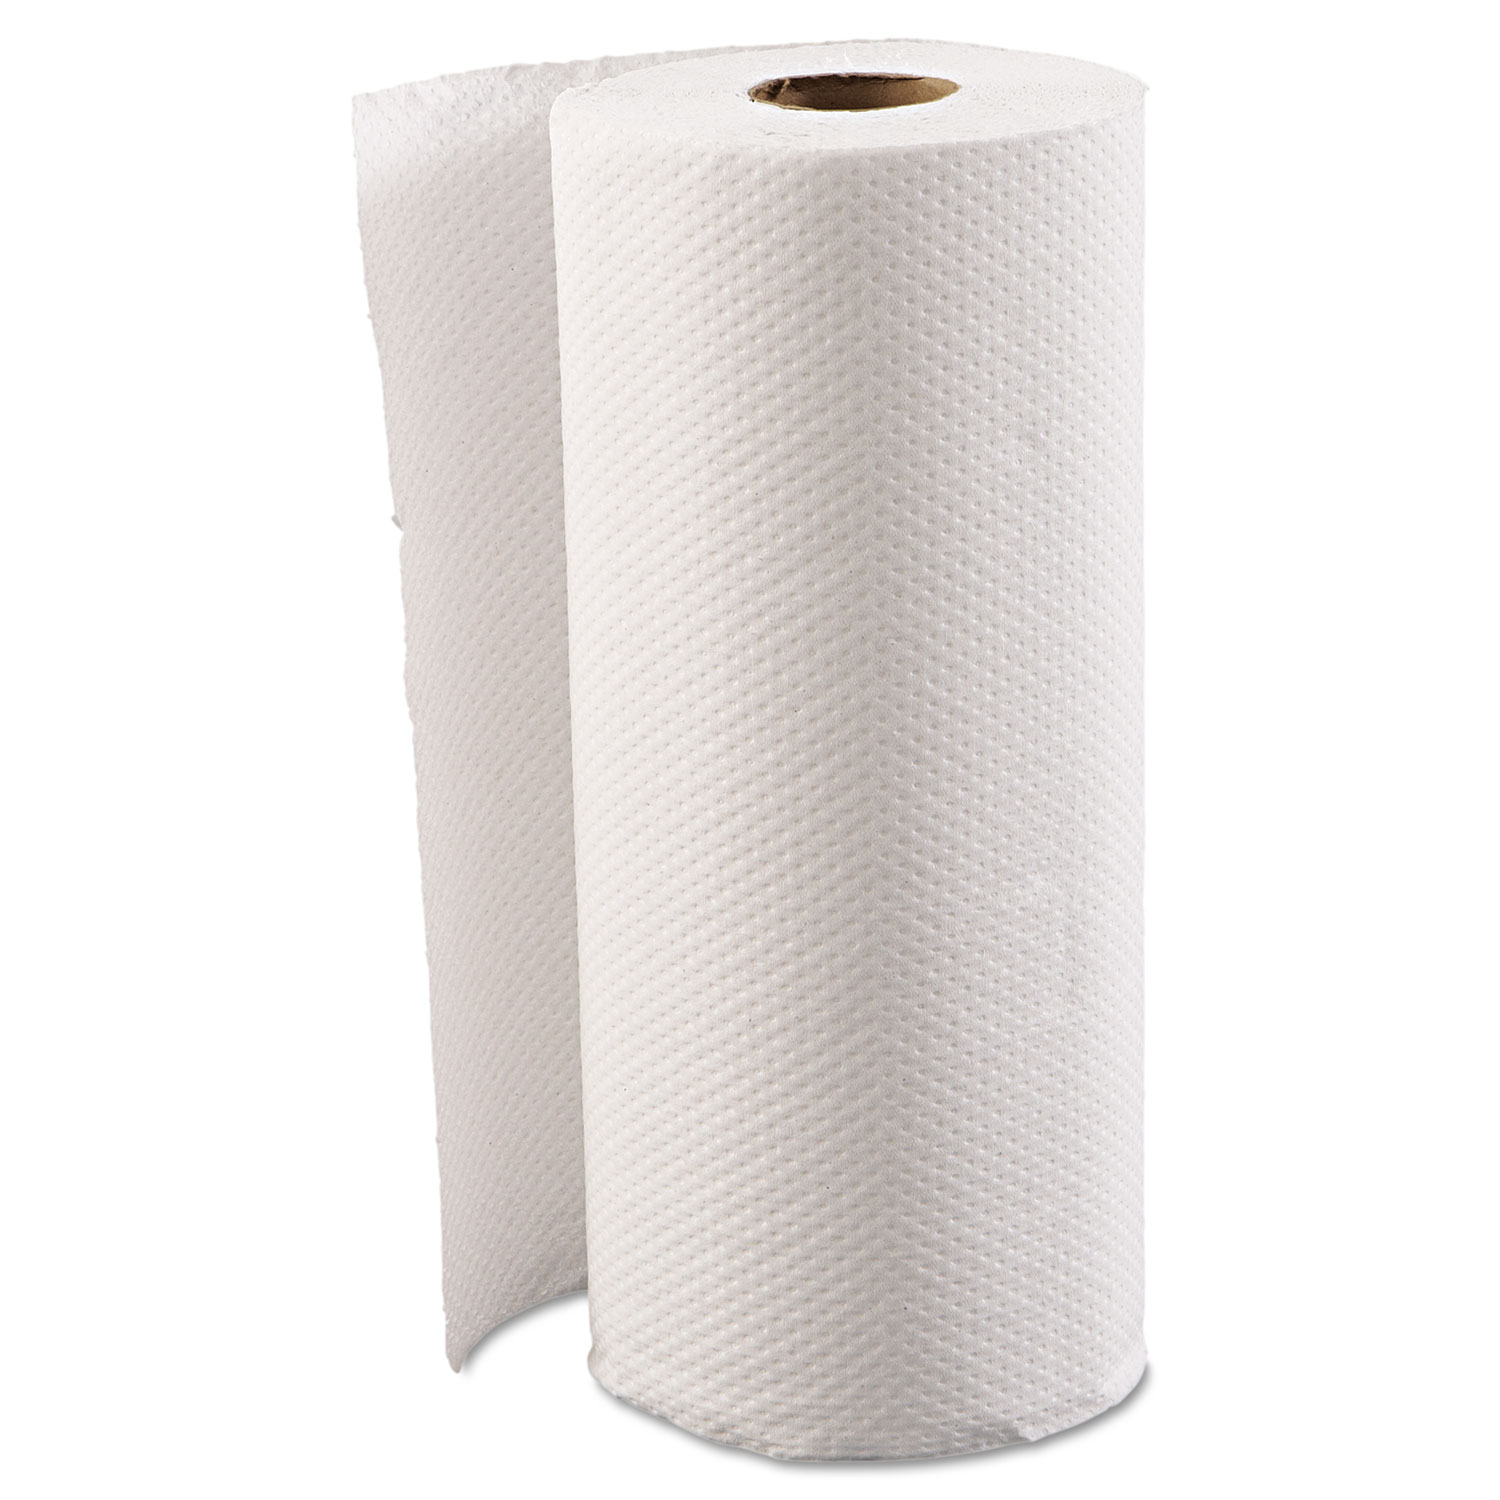 Perforated Paper Towel Rolls, 2-Ply, 11 x 9, White, 100/Roll, 30 Rolls/Carton